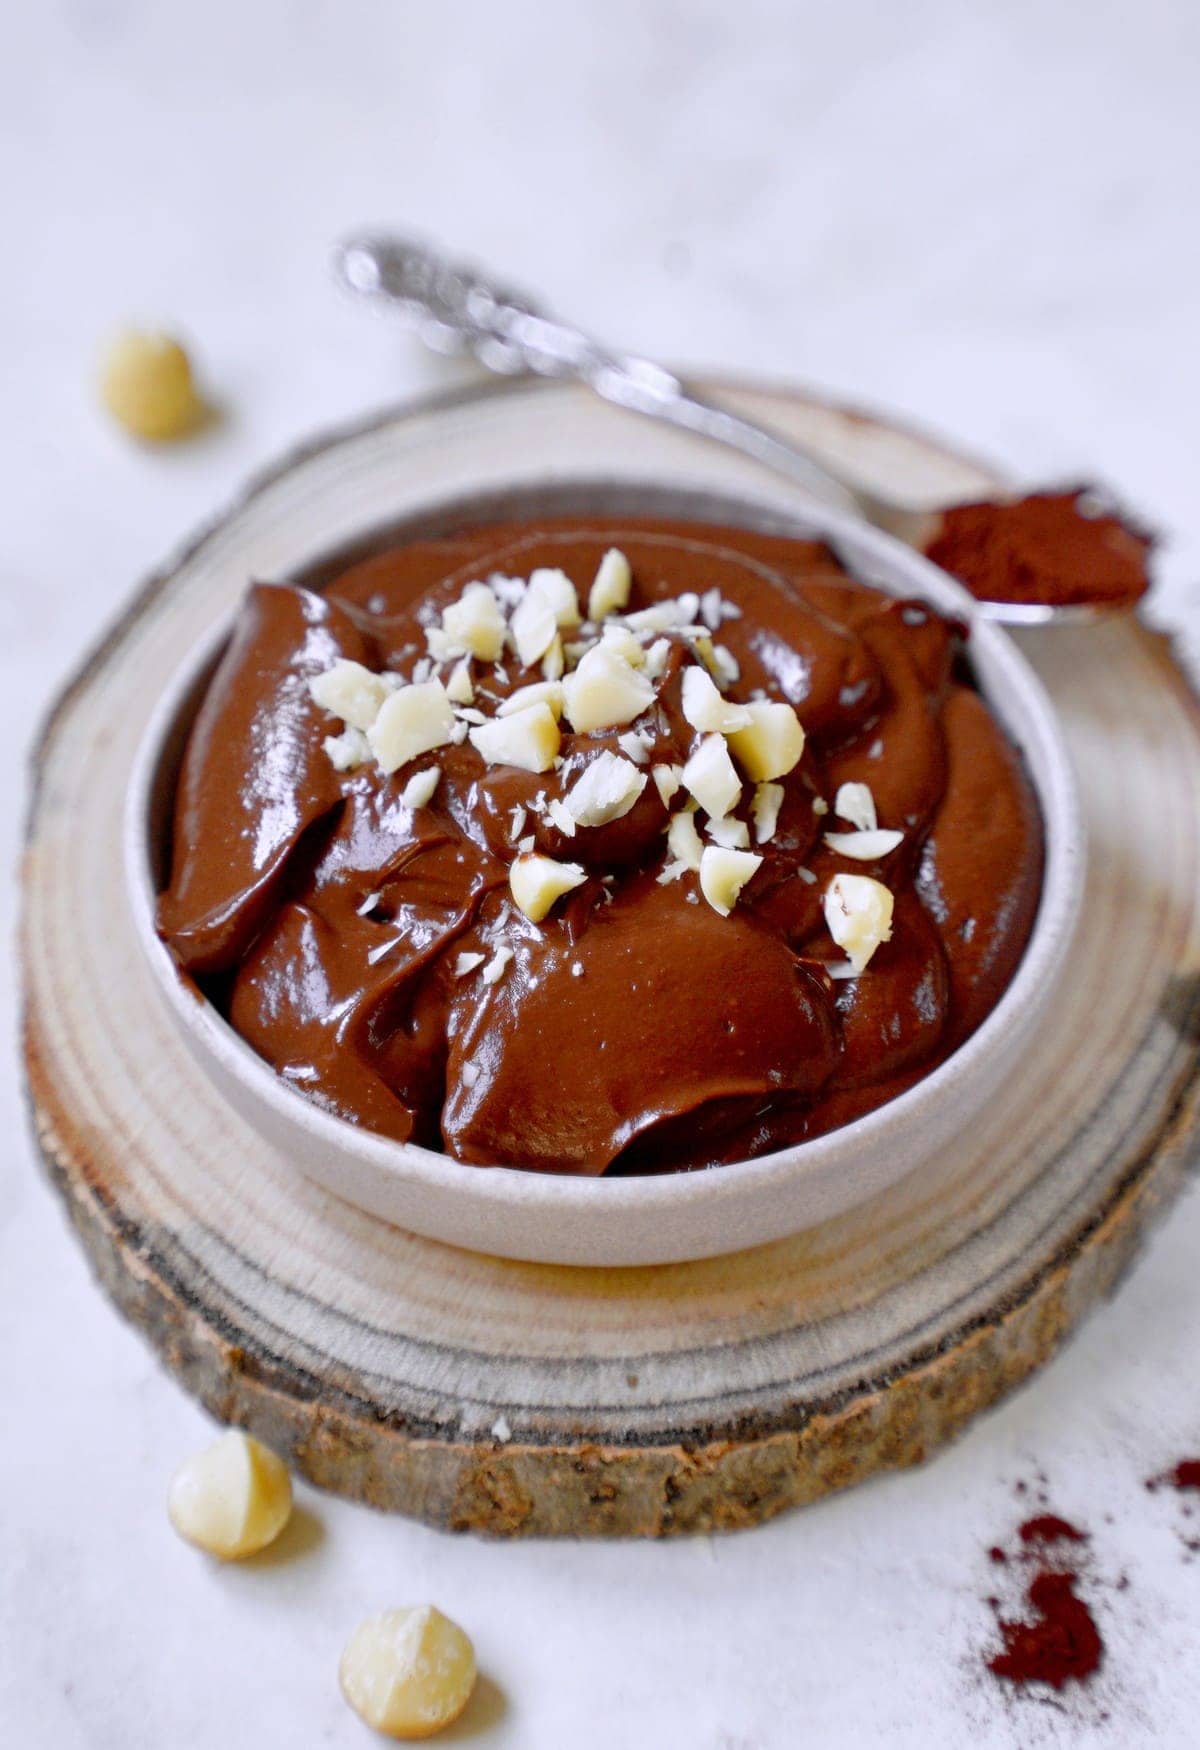 avo chocolate pudding in bowl with crushed nuts